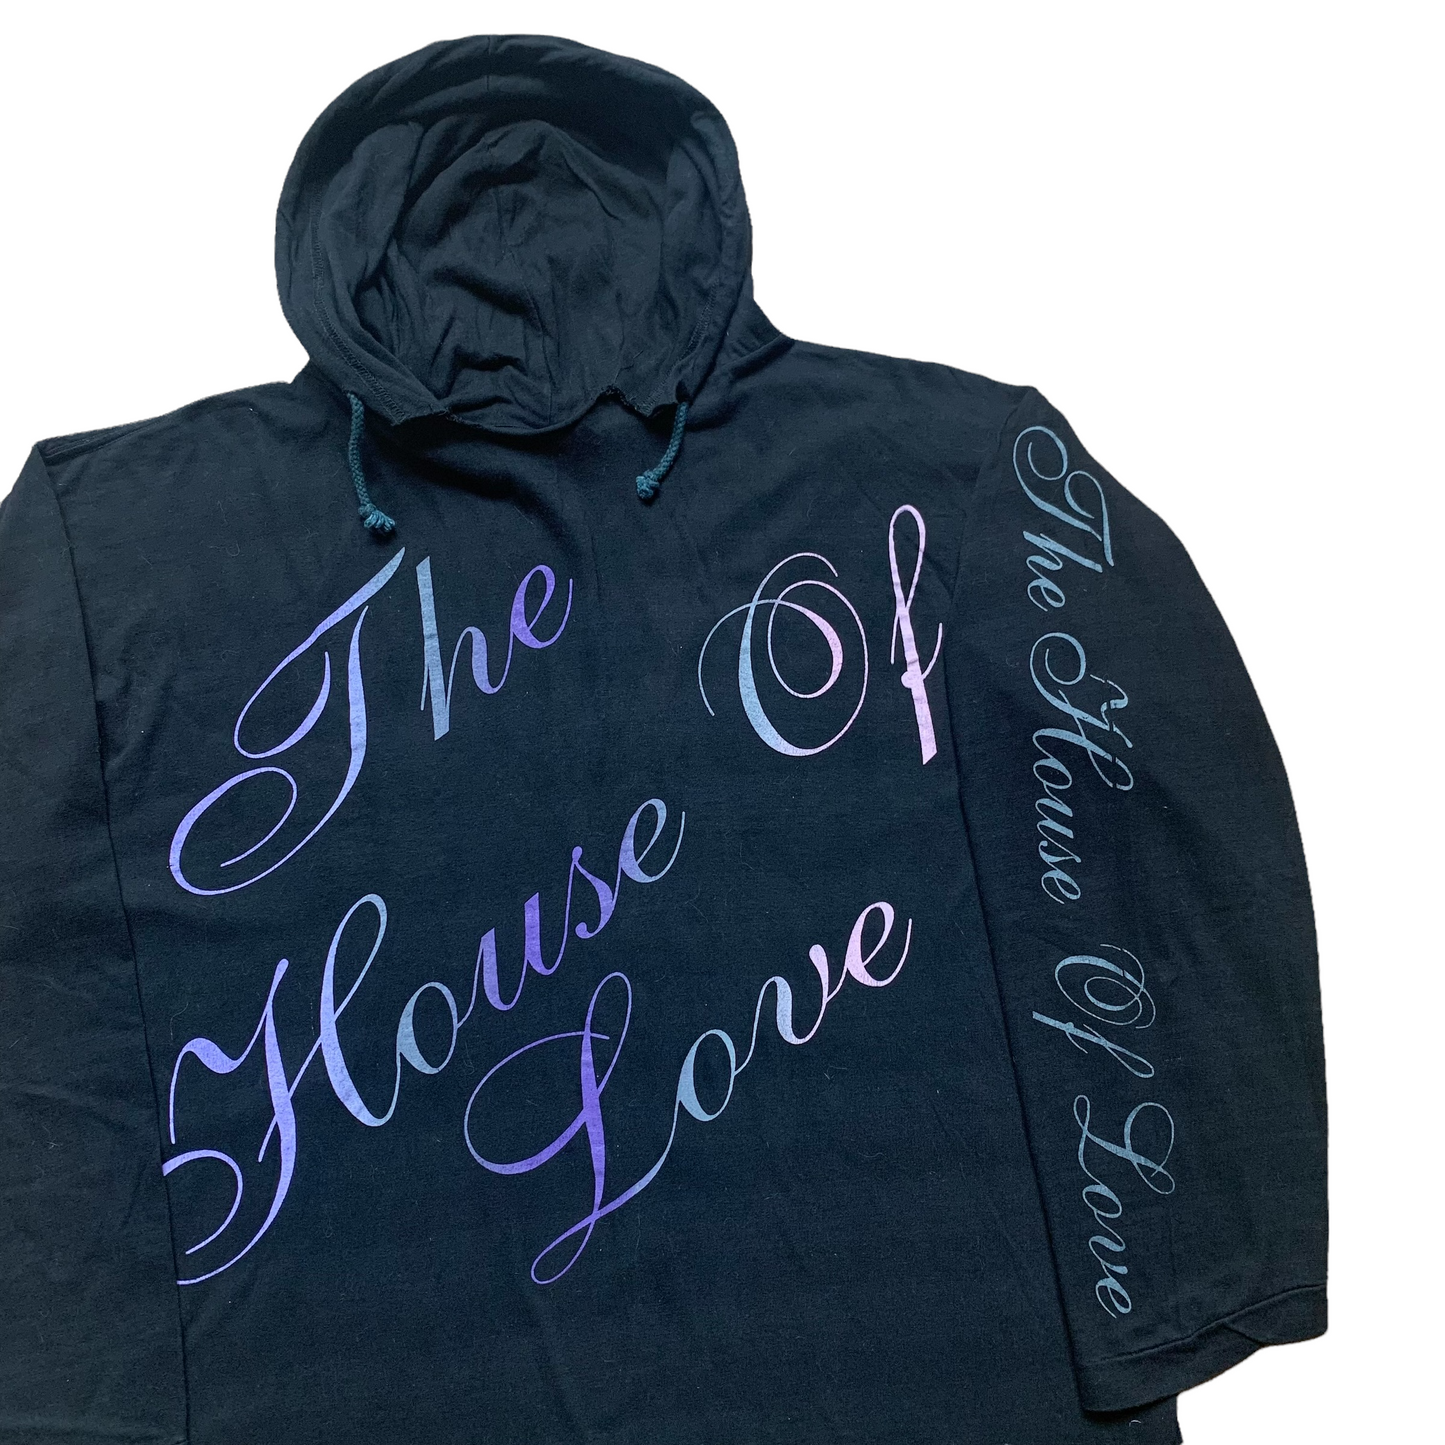 1990 House of Love (XL)